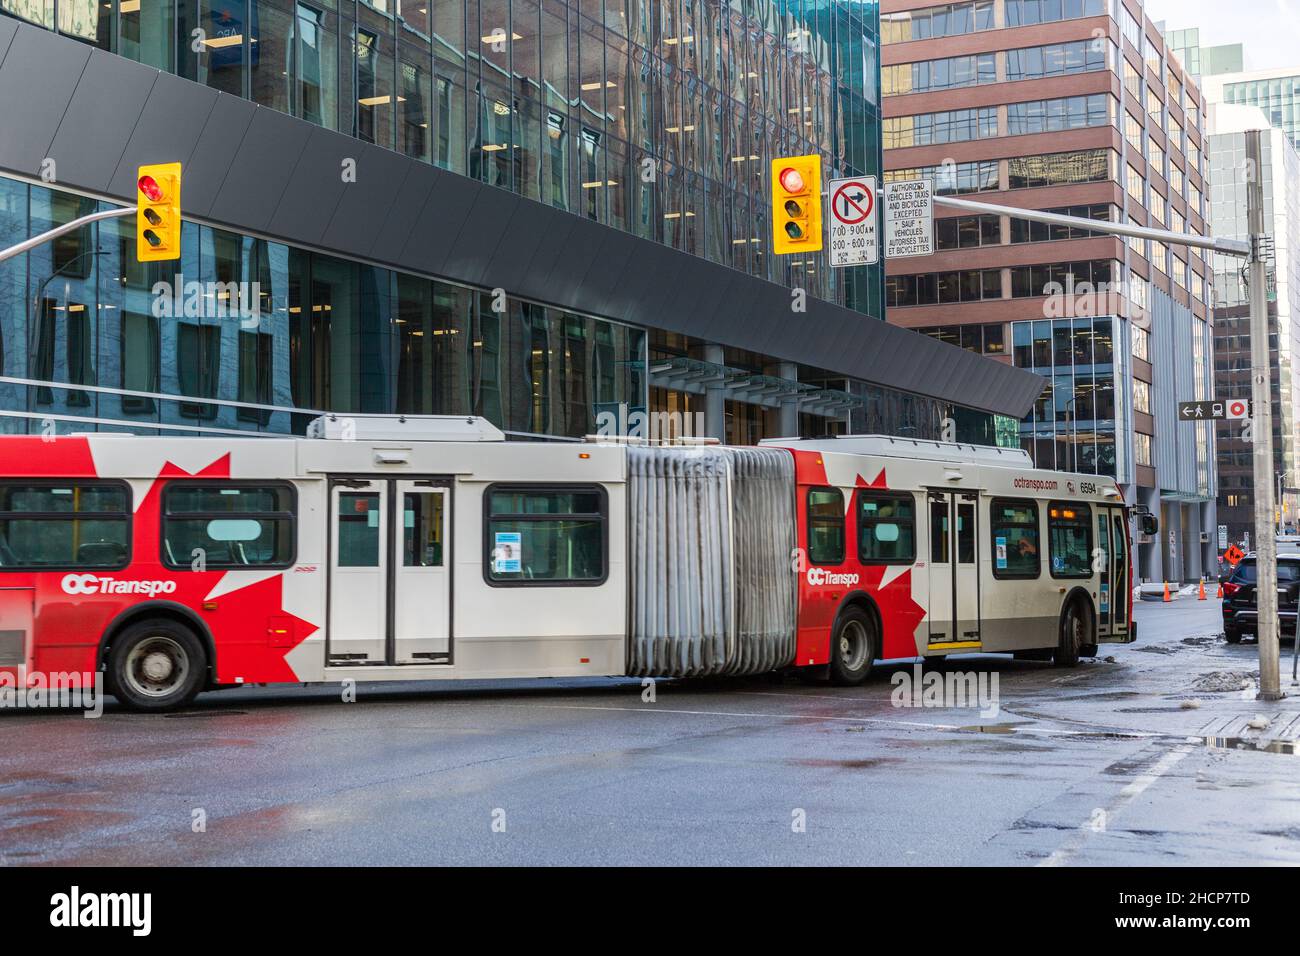 Ottawa, Canada - December 16, 2021: Public bus on thre road in downtown of the city , turning at intersection with traffic lights Stock Photo